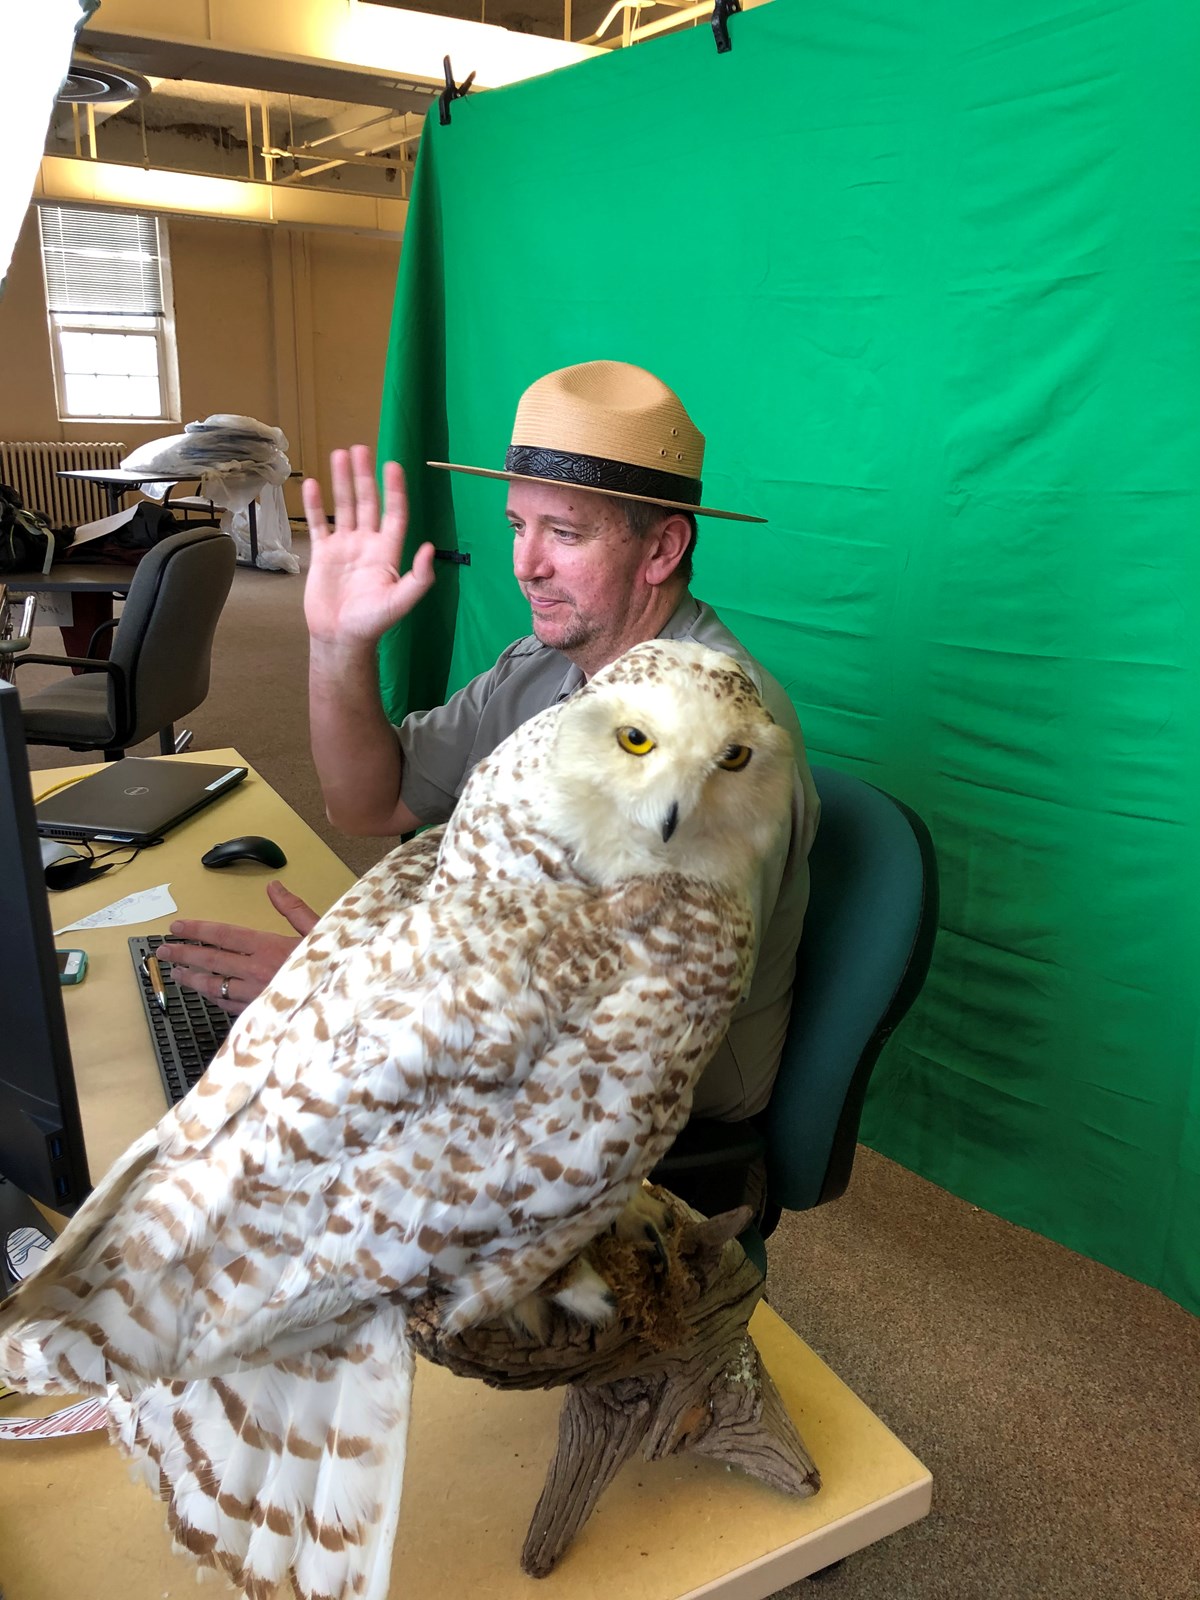 Education specialist in front of computer screen with a taxidermy snowy owl